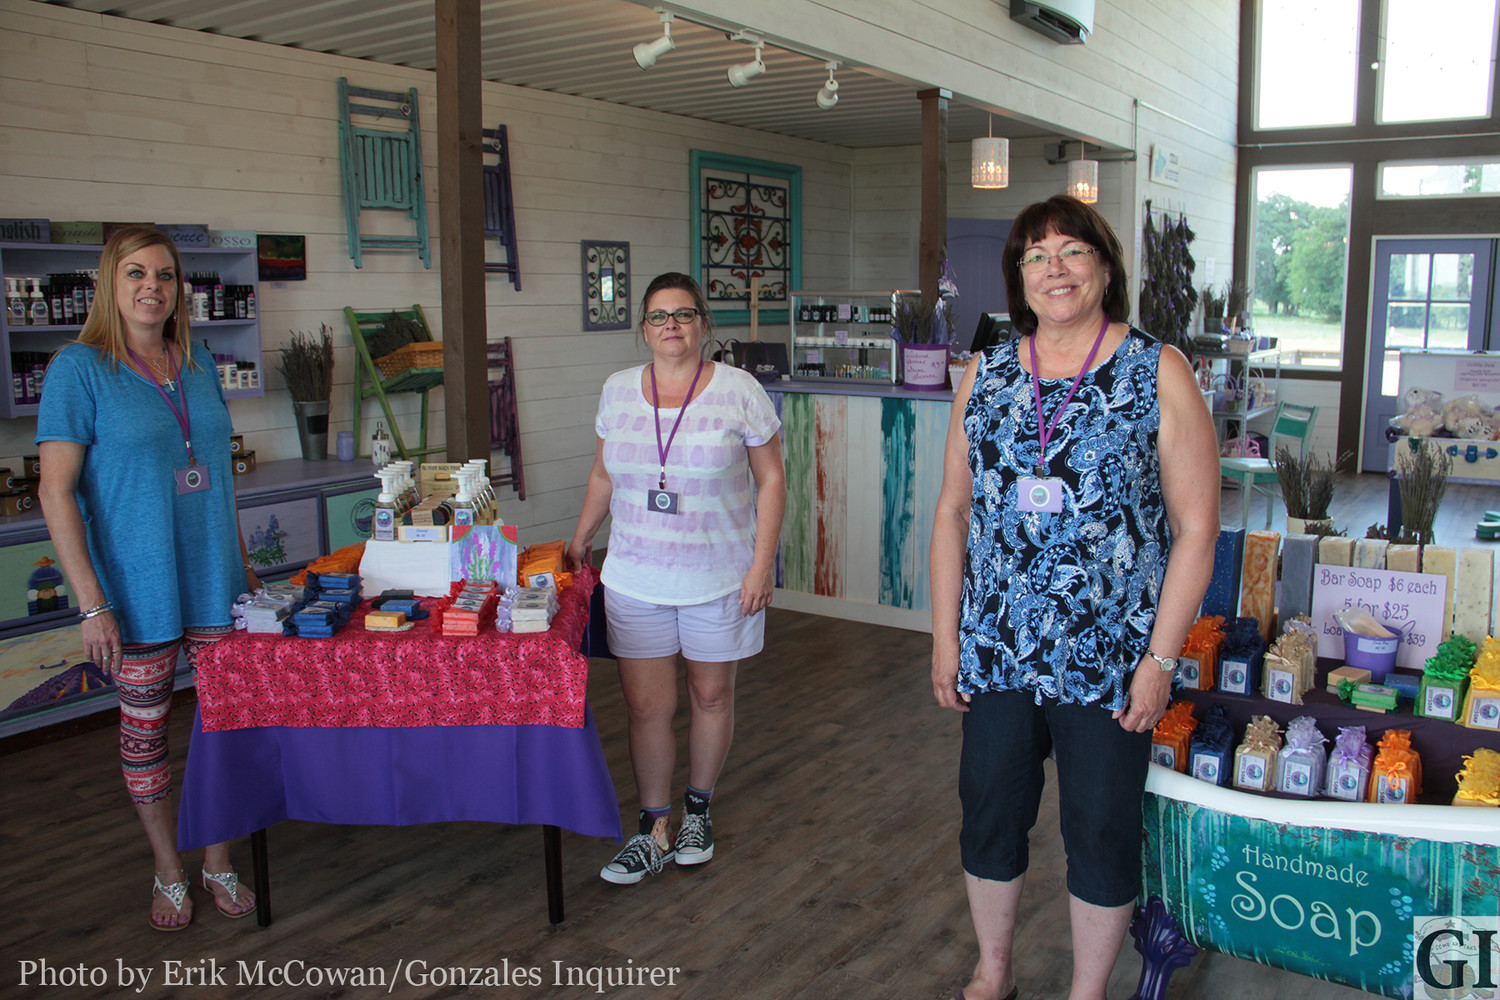 From left, Tina Rader, Princess Ferrell, and owner Erin Leavitt take a stroll around the new establishment that has everything lavender from soaps and shampoo to powders and beard oil.